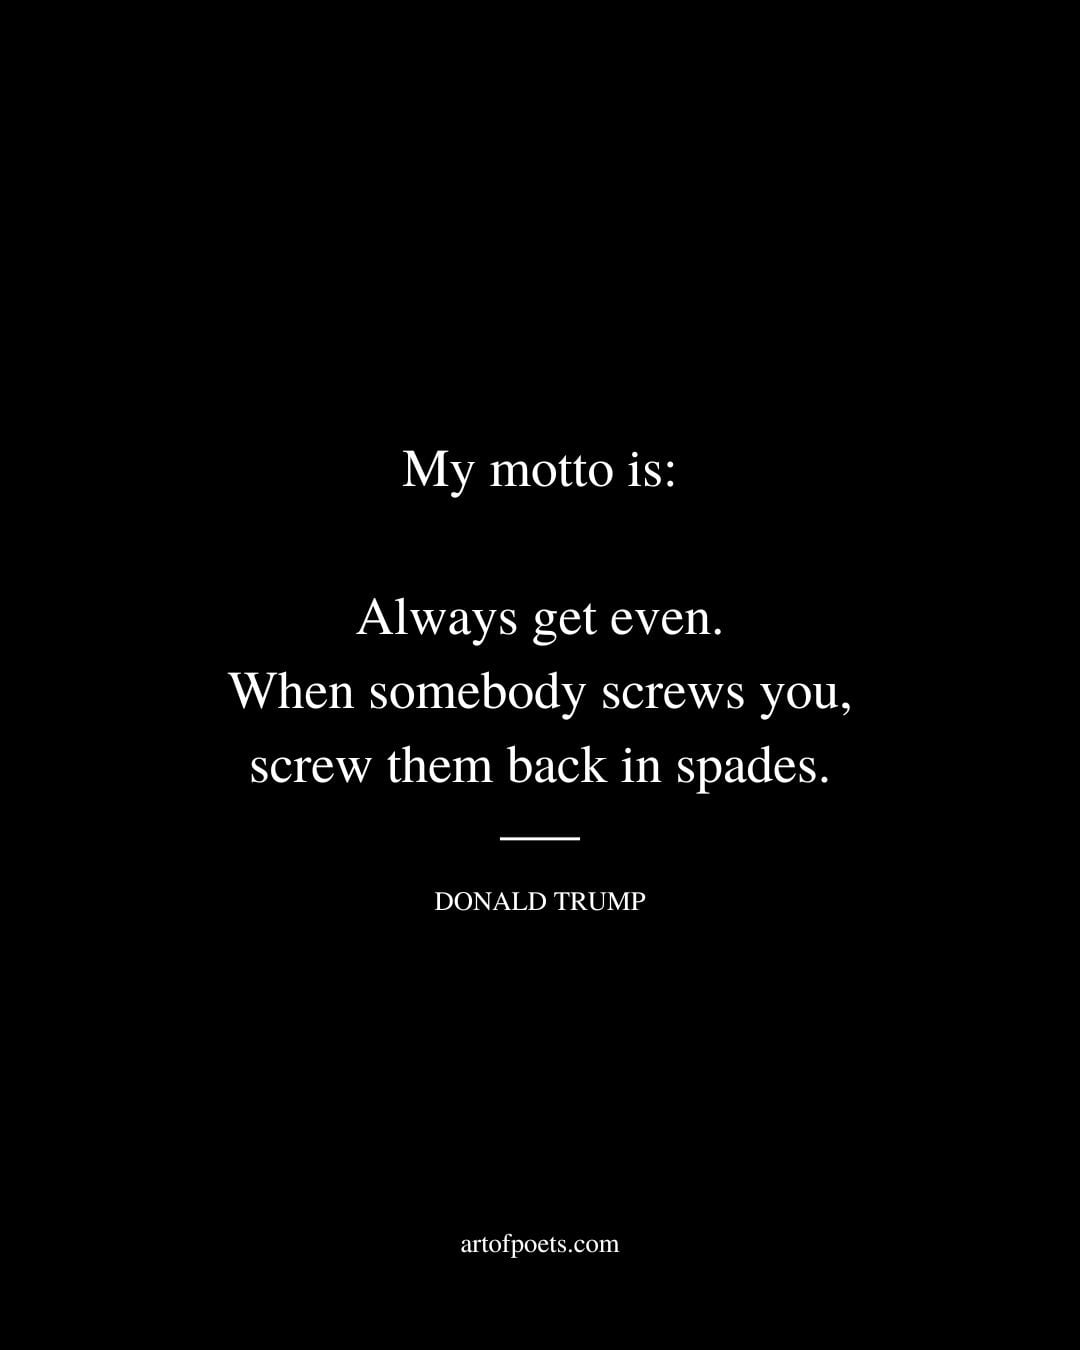 My motto is Always get even. When somebody screws you screw them back in spades